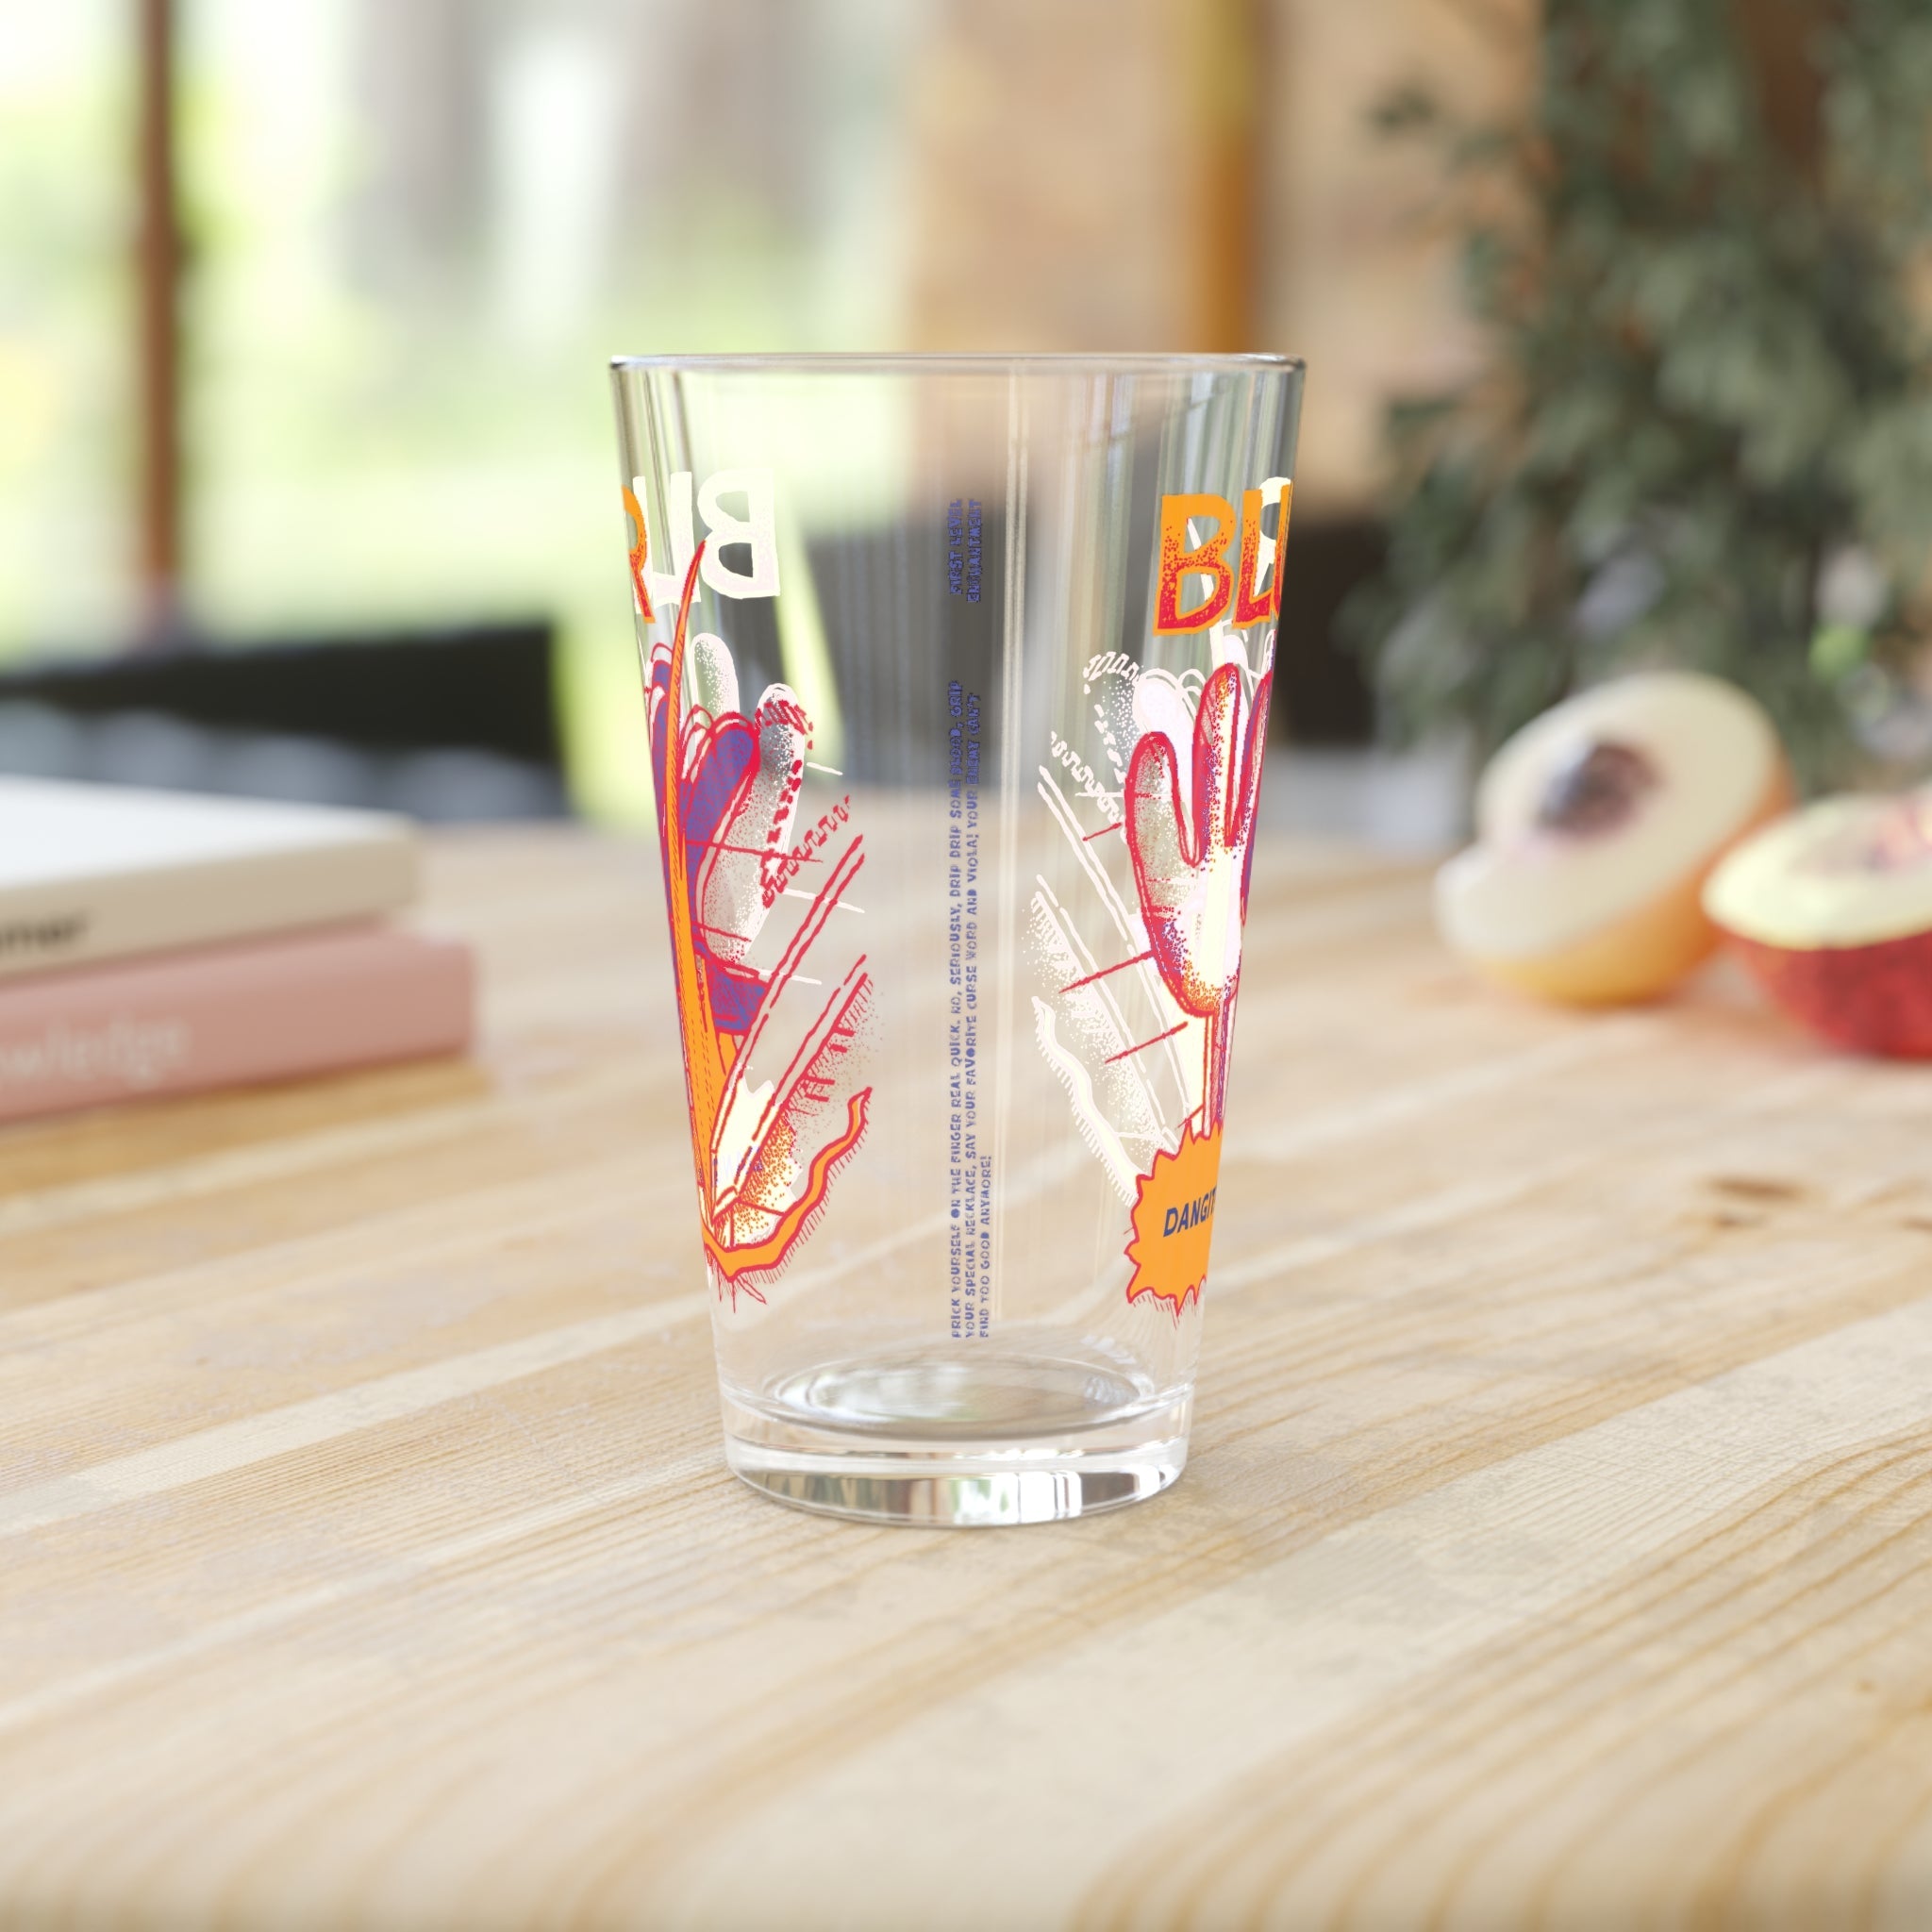 Blur | Pint Glass, 16oz - Drinkware Sets - Ace of Gnomes - 16961182686318479209